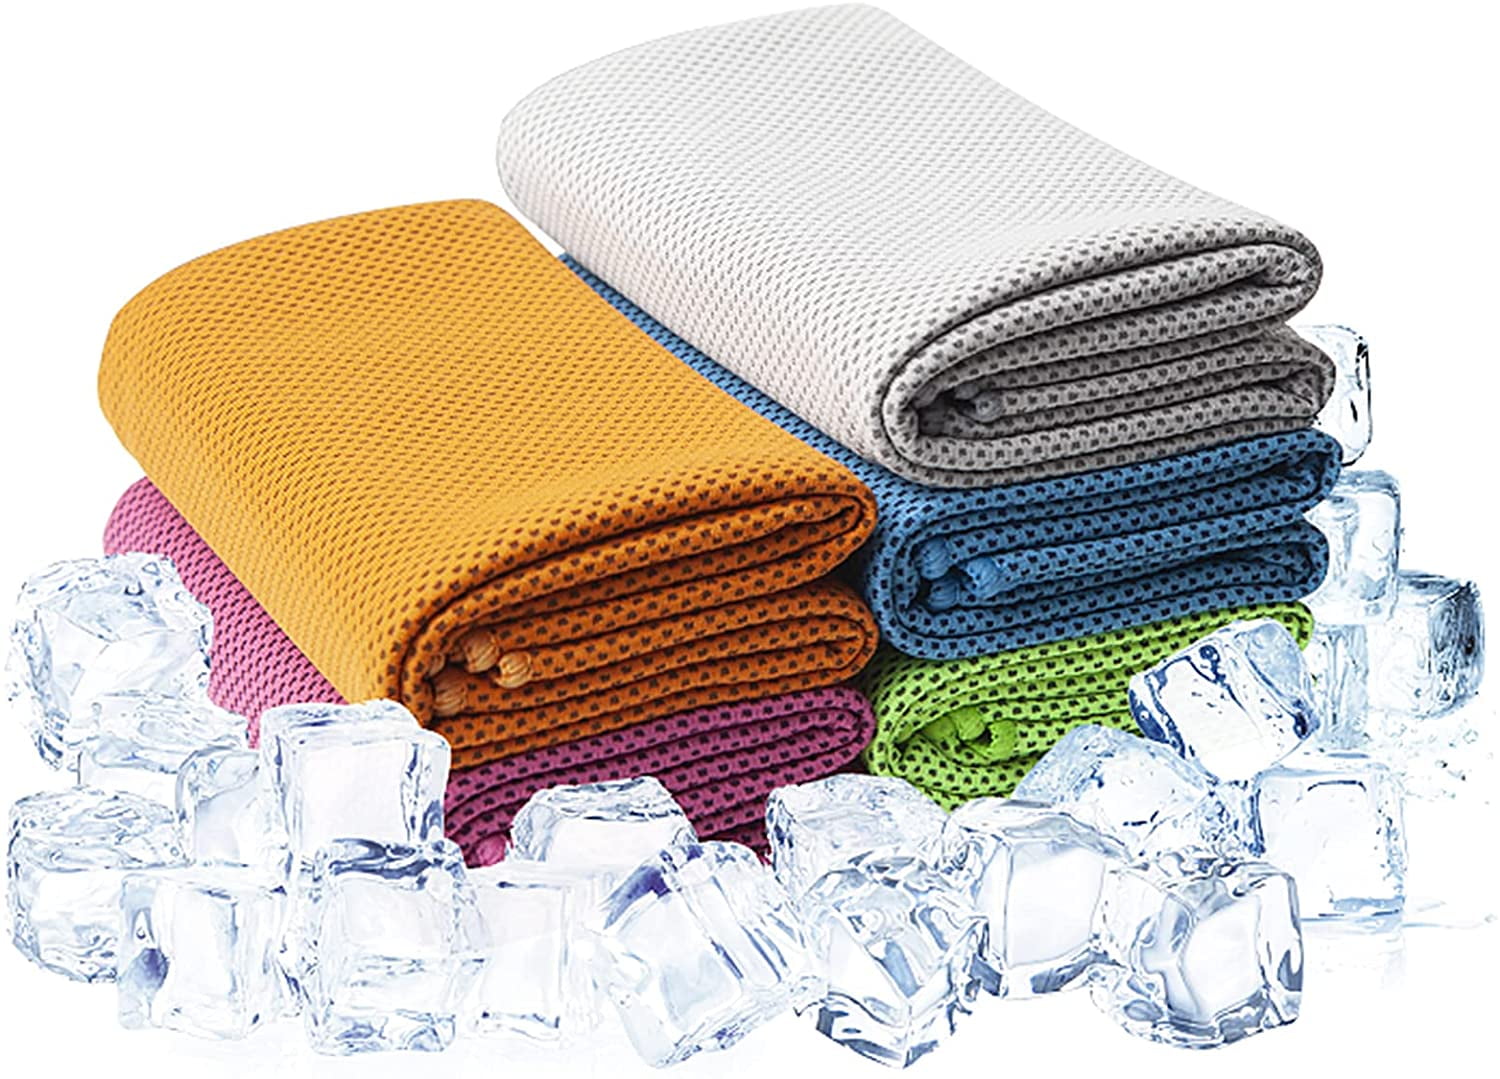 ,Ice Towel,Microfiber Towel,Soft Breathable Chilly Towel for Yoga,Sport,Gym,Workout,Camping,Fitness,Running,Workout&More Activities 4 Packs Cooling Towel 40x 12 